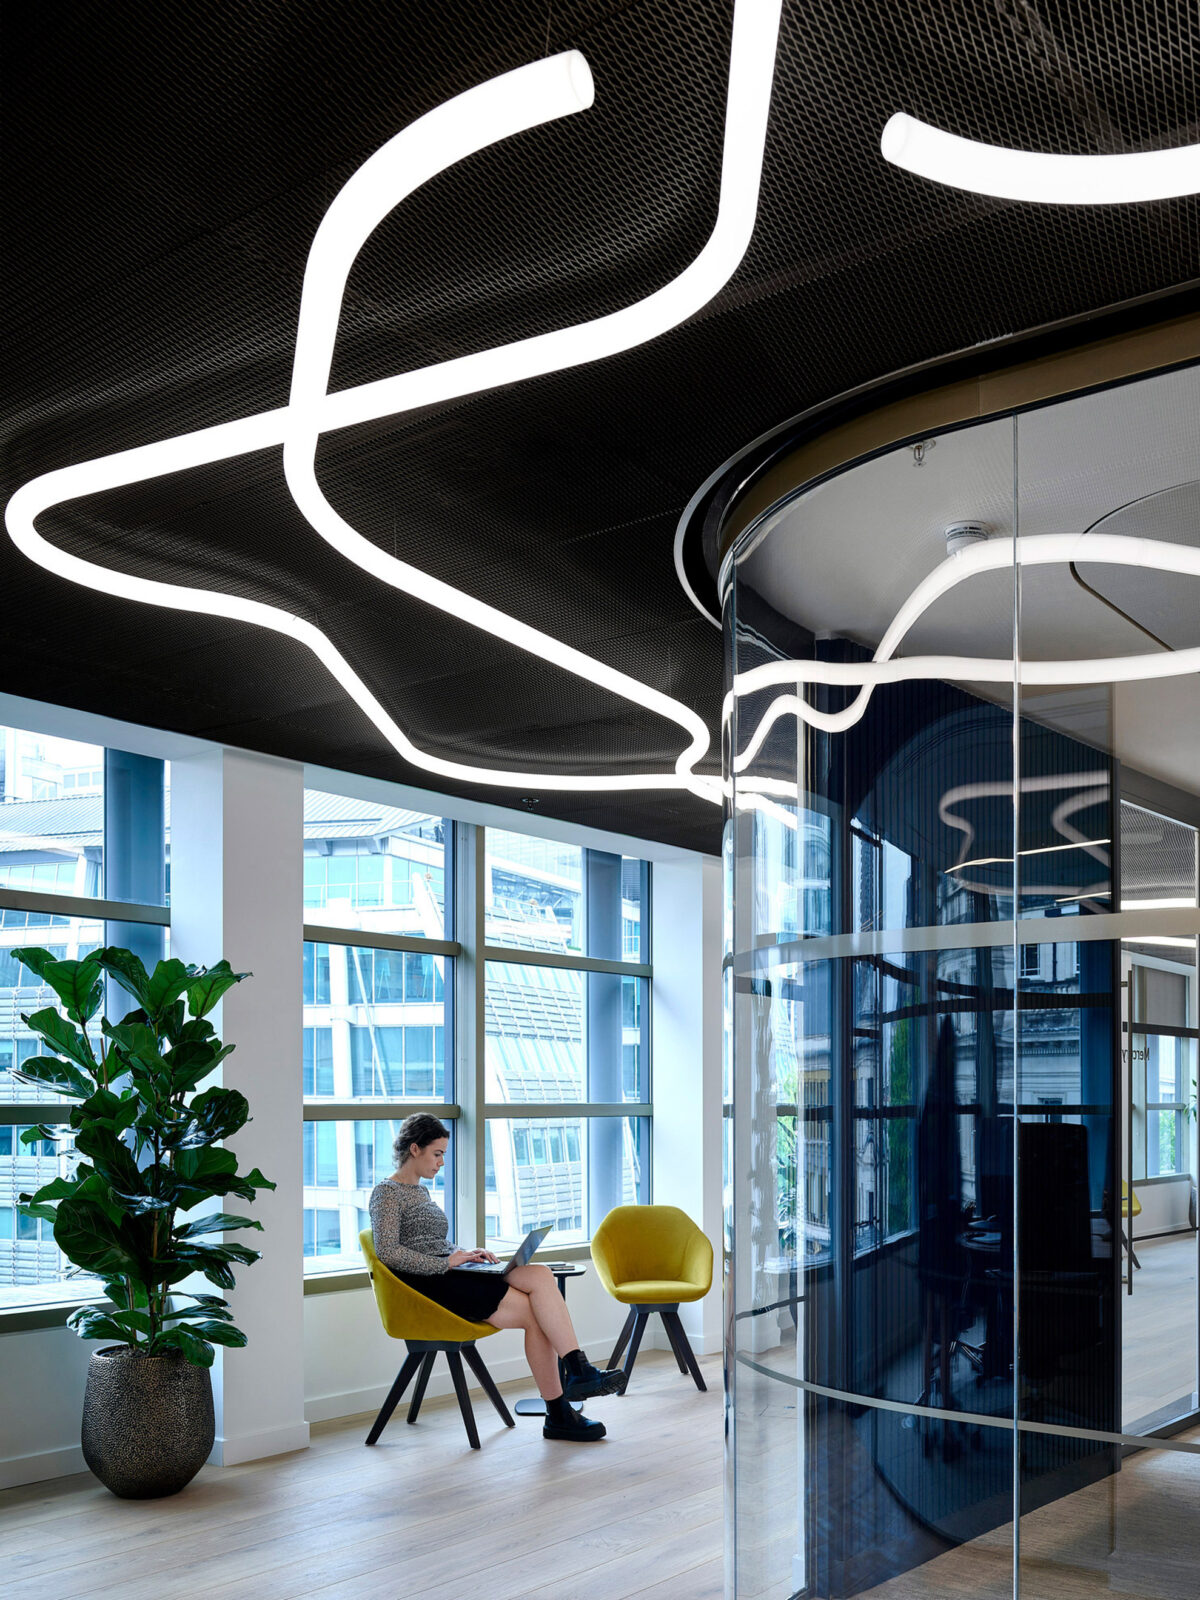 Contemporary office space featuring a striking overhead serpentine lighting design, contrasted against a black ceiling. The sleek, circular glass meeting room adds transparency, complemented by a vibrant yellow chair and lush greenery, enhancing the visual aesthetic and collaborative environment.